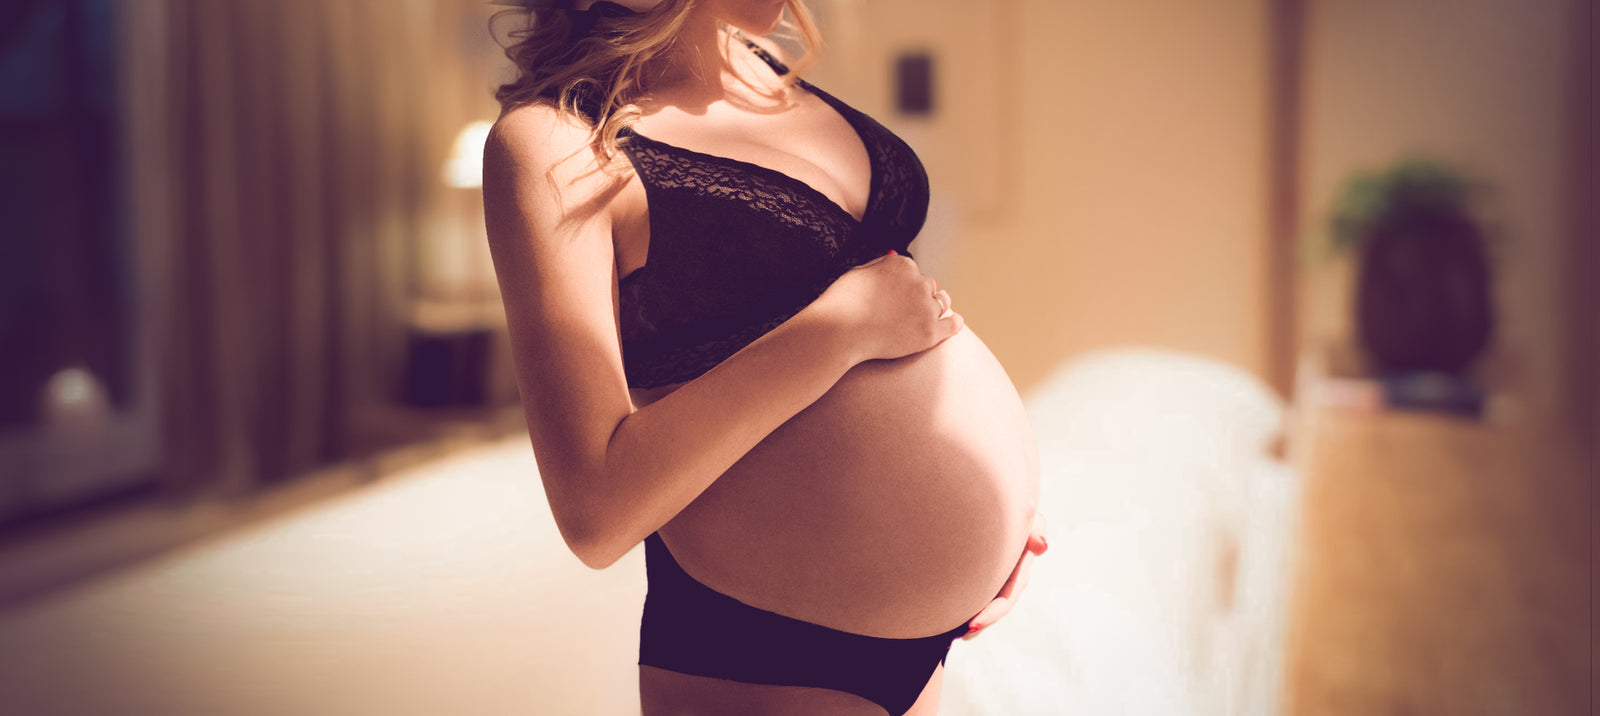 https://www.lovesuze.com/cdn/shop/articles/How_to_Shop_and_Save_Money_for_Your_Changing_Body_During_Pregnancy_LoveSuze_LoveNotes_Blog_f2782d67-f8f2-4ddd-8bce-99975ccd1e1c_1600x.jpg?v=1657304871